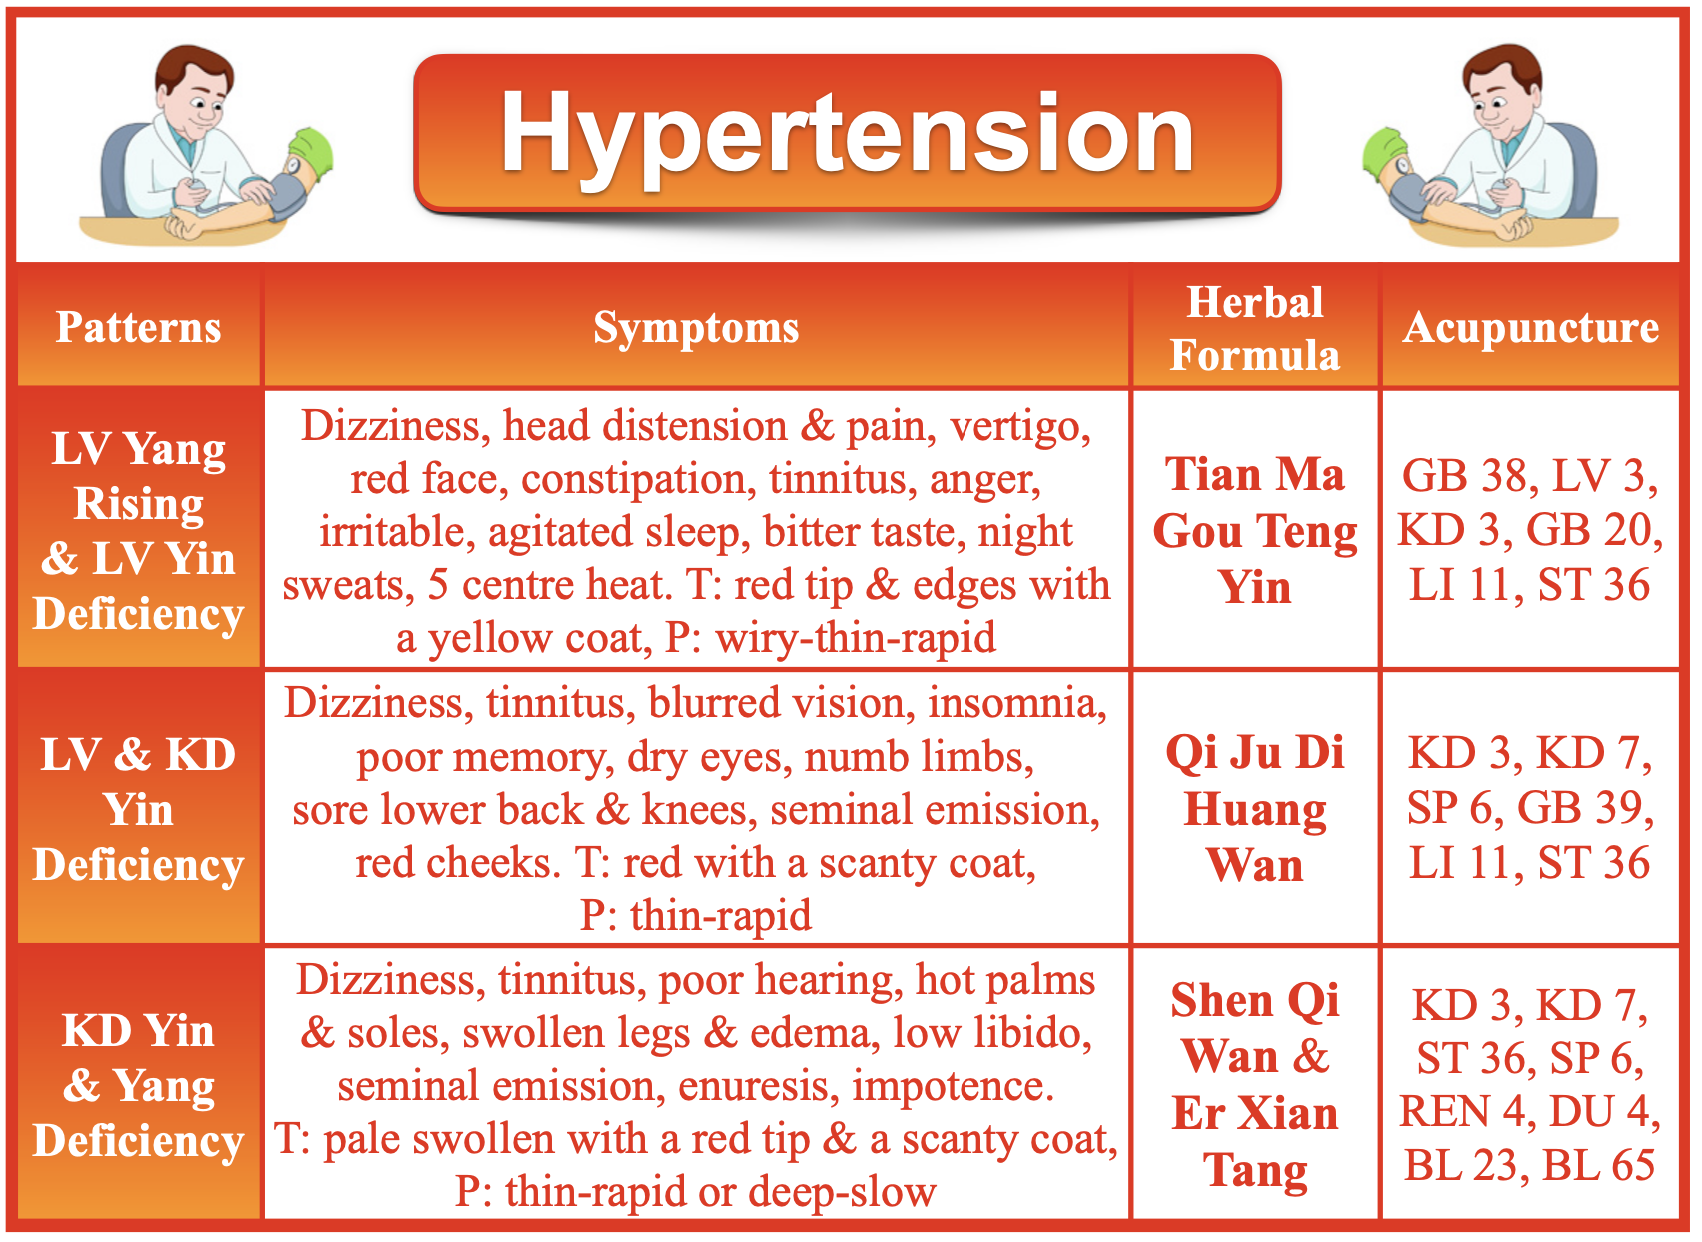 Hypertension and acupuncture